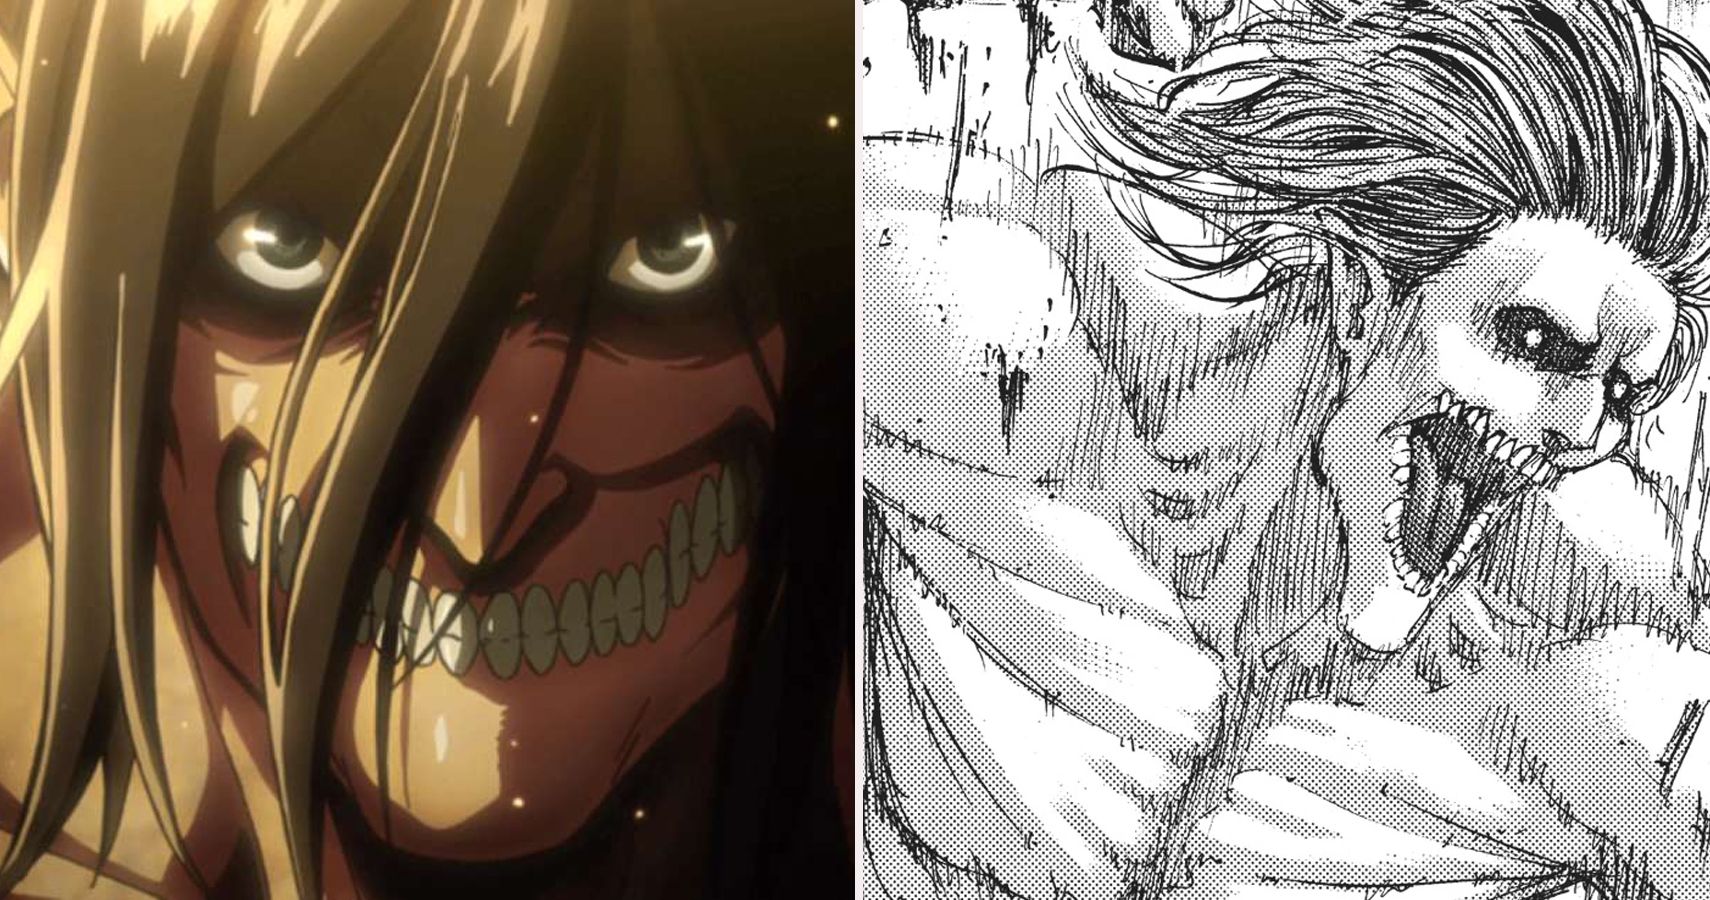 Attack On Titan 10 Differences Between The Anime The Manga Attack on titans is pretty brutal if you think about it, especially if you see how they handle themes of survival and ending others for greater good. attack on titan 10 differences between